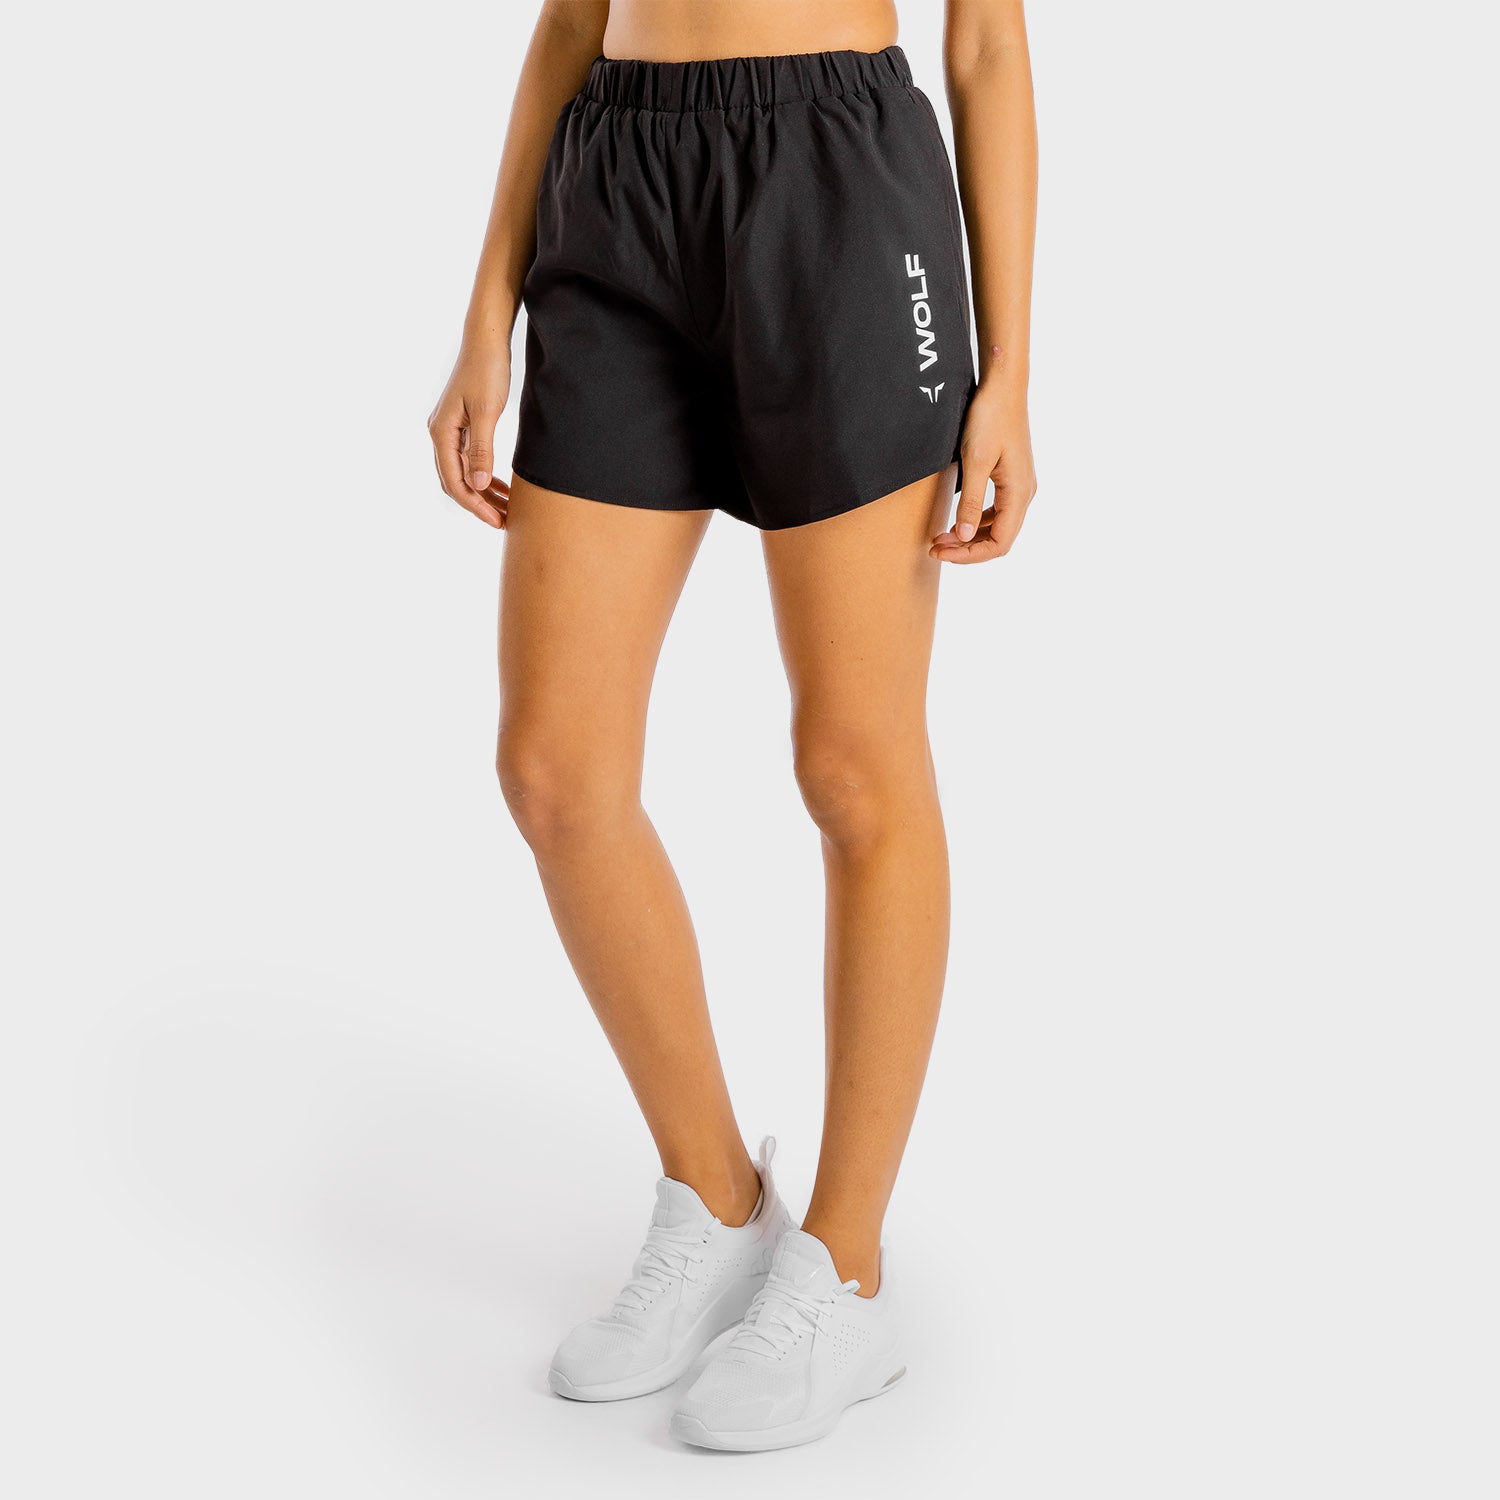 squatwolf-workout-clothes-primal-2-in-1-shorts-black-gym-shorts-for-women